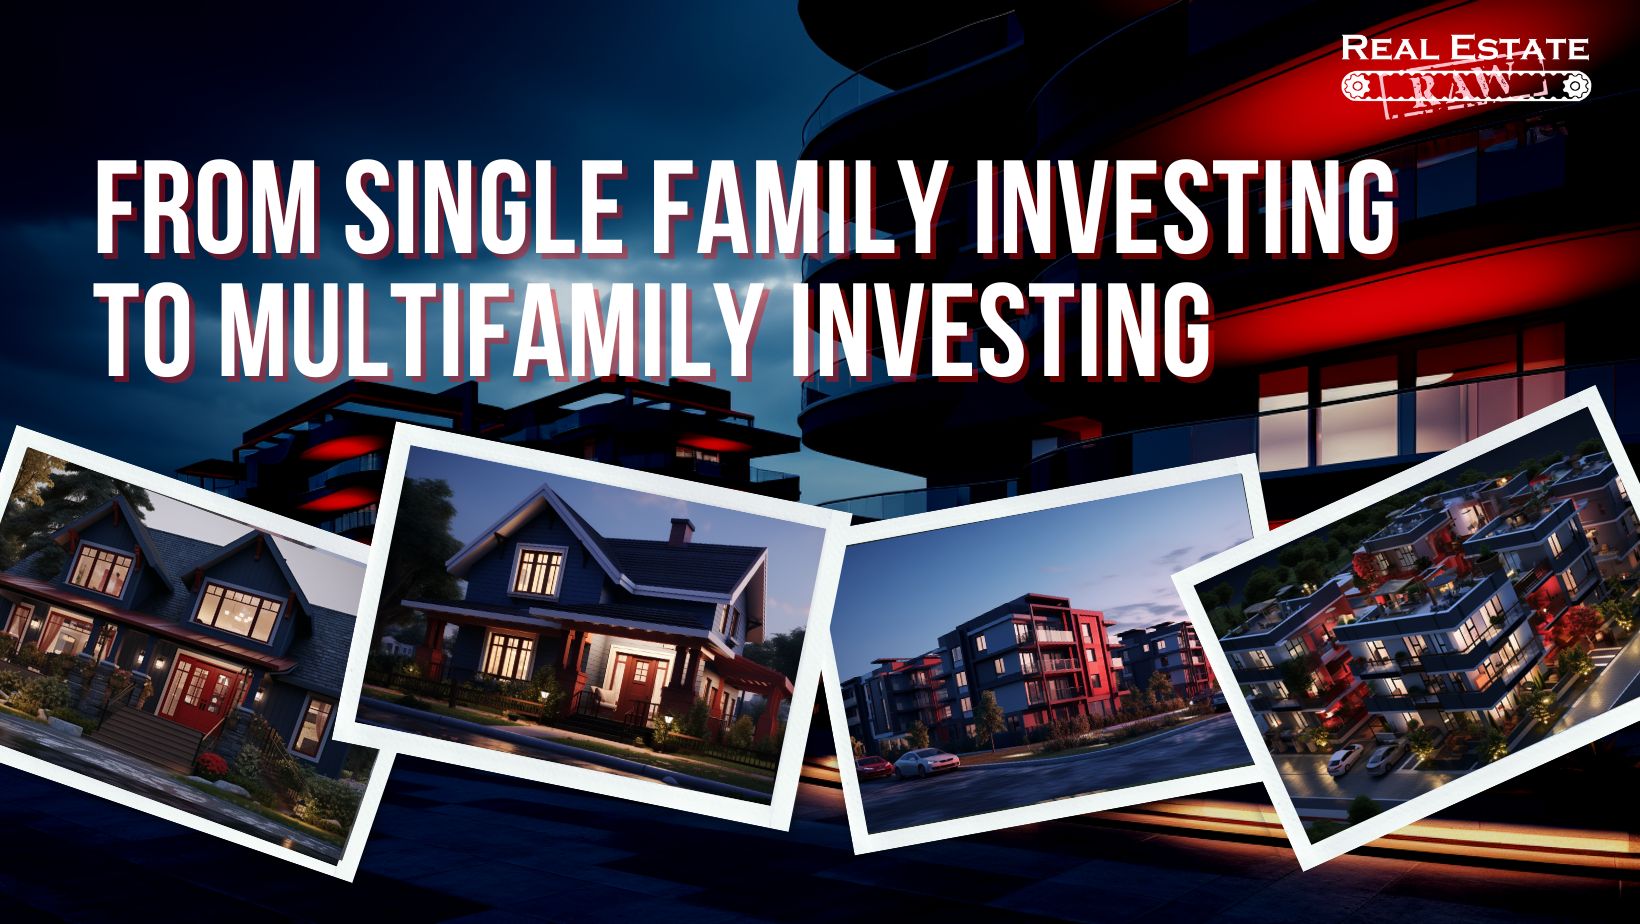 How to Go from Single Family Investing to Multifamily Investing